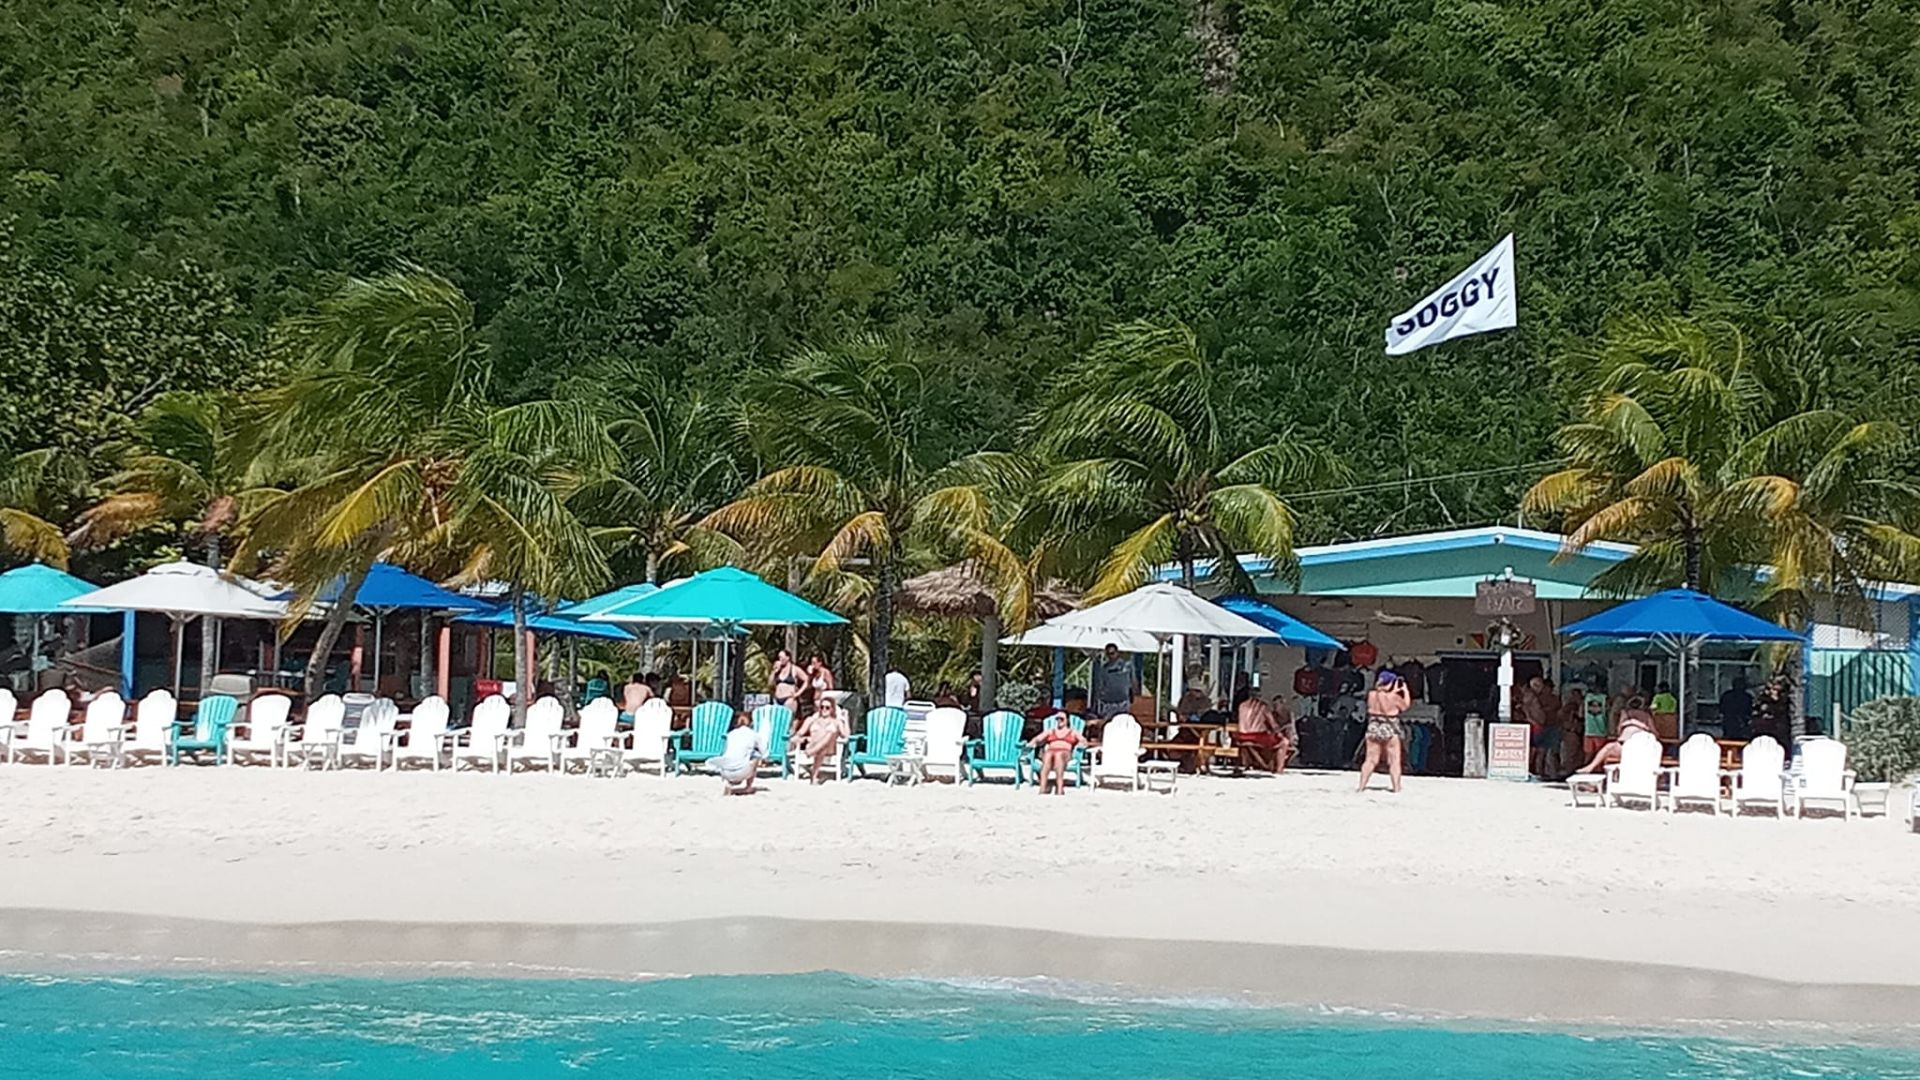 A Crowd Of People At A Beach